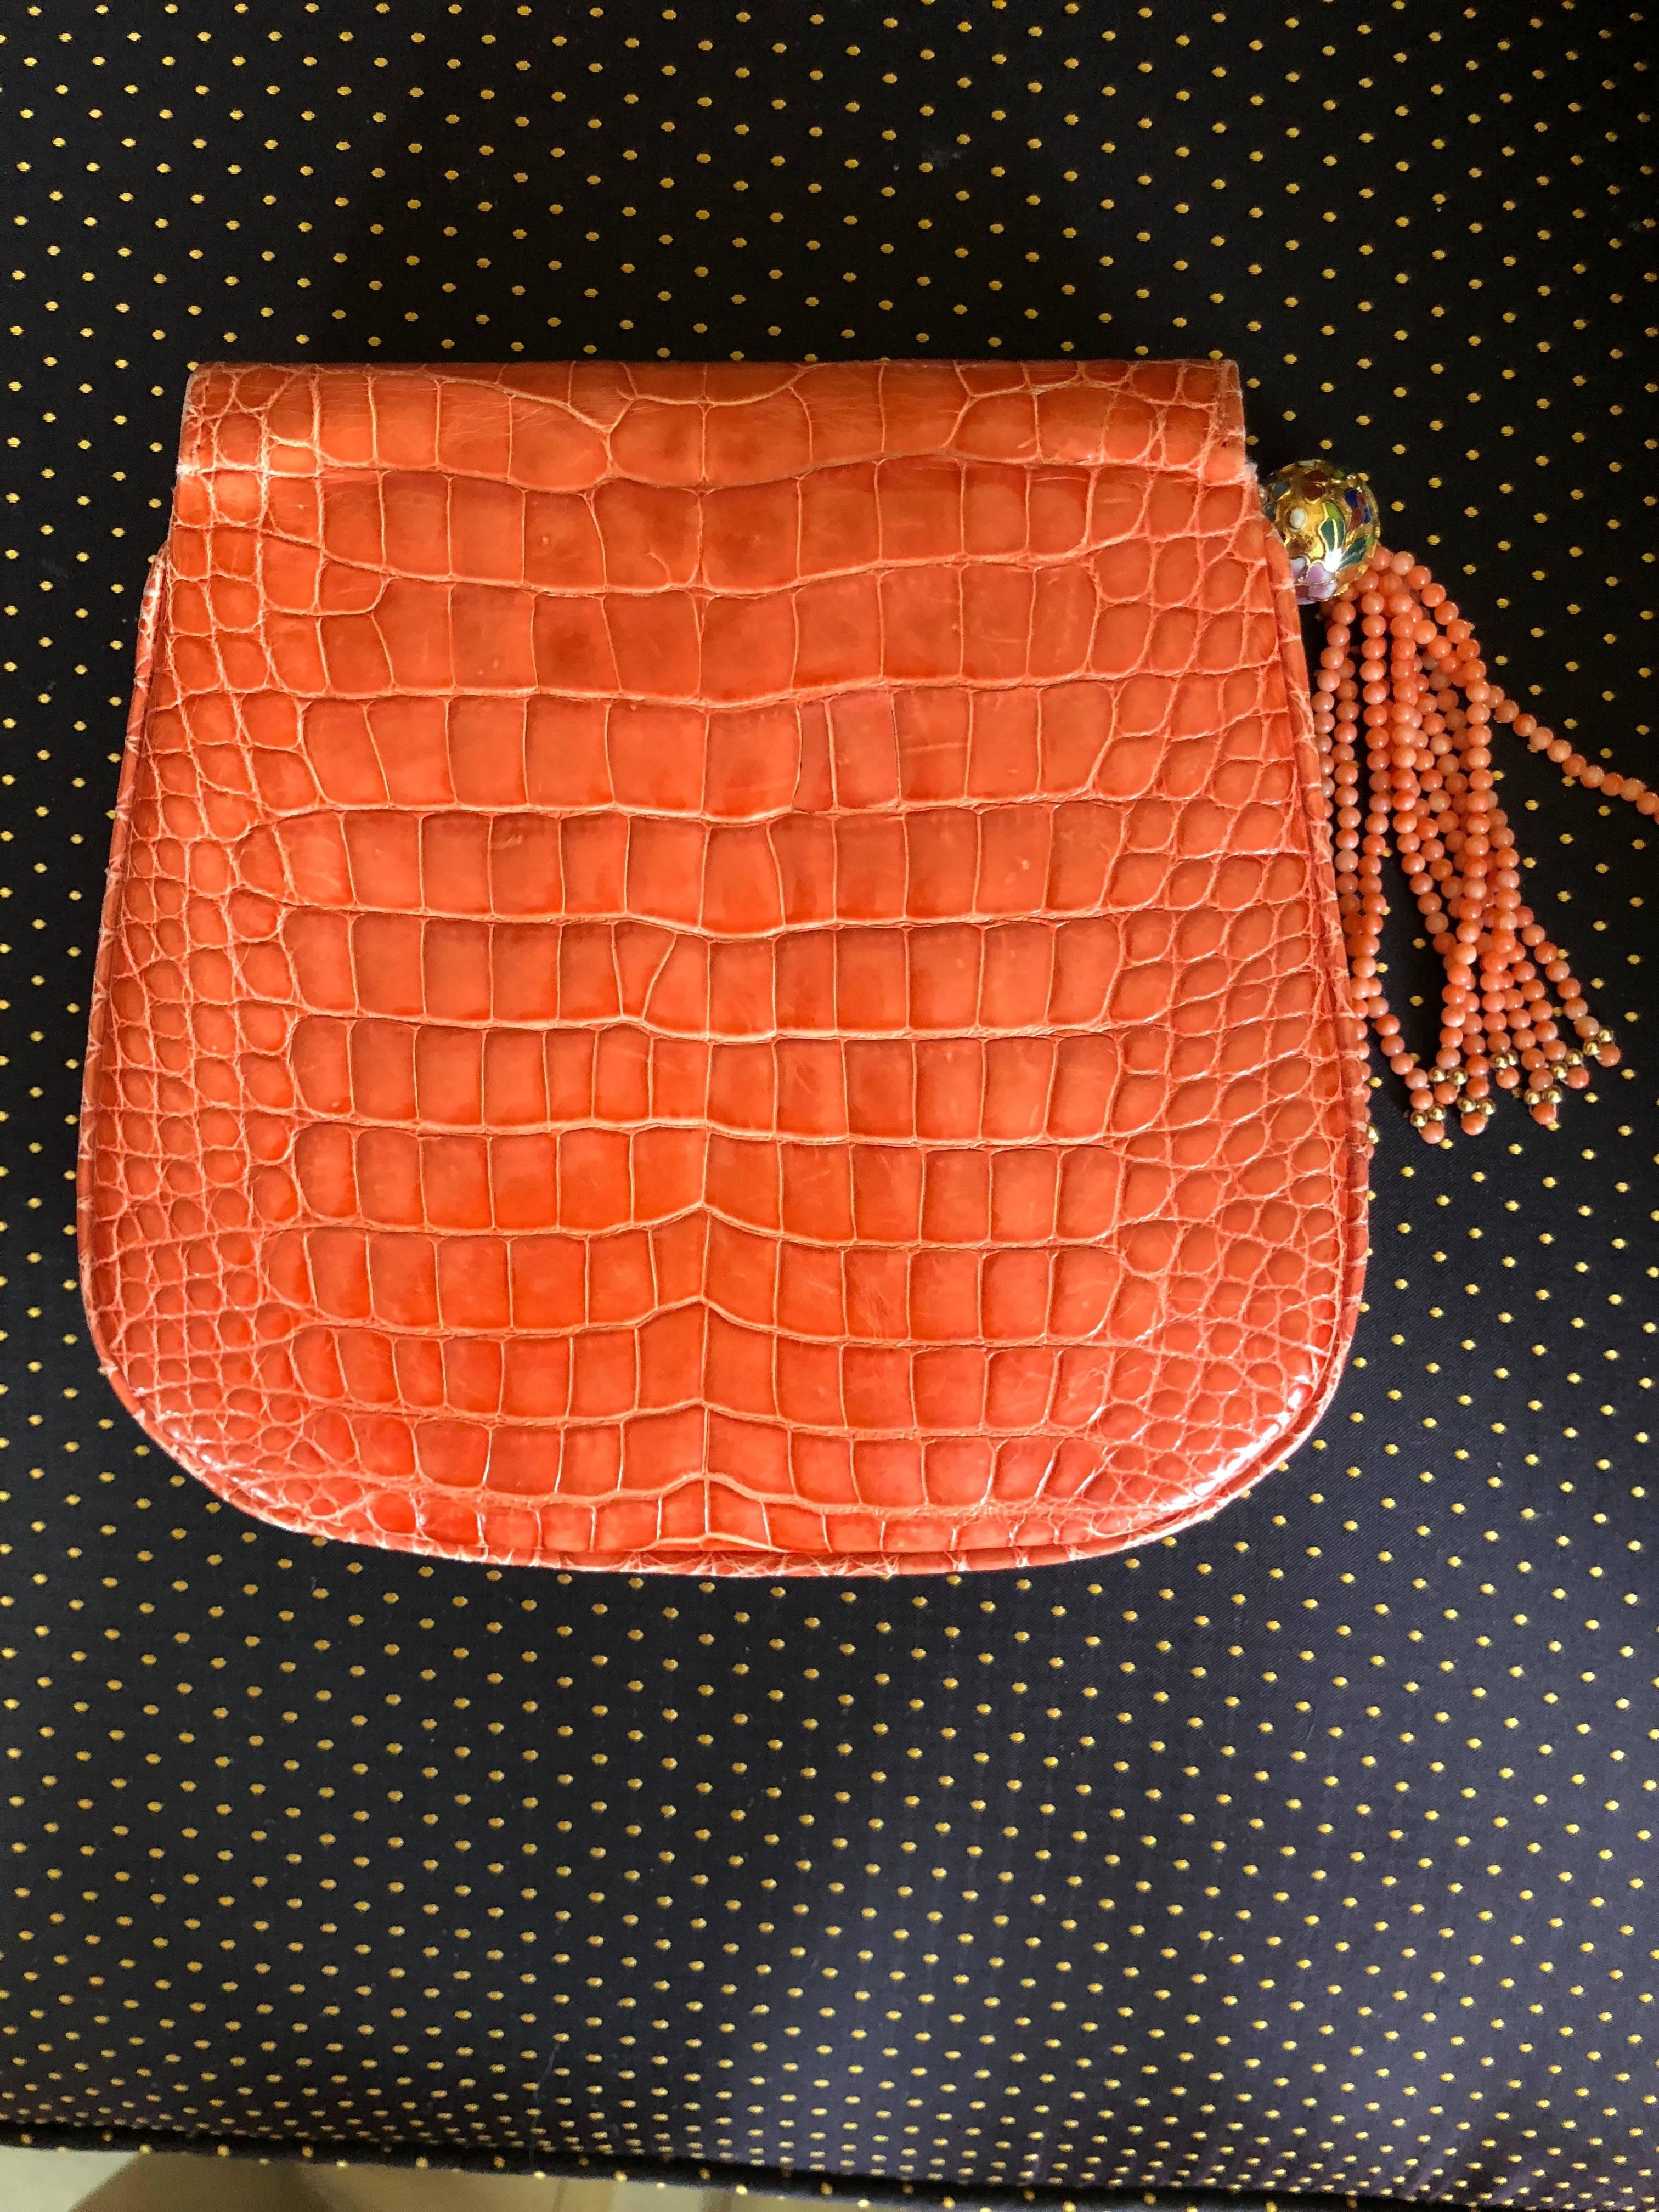  Lana of London Exquisite Orange Crocodile Evening Bag with Coral Bead Strap For Sale 1